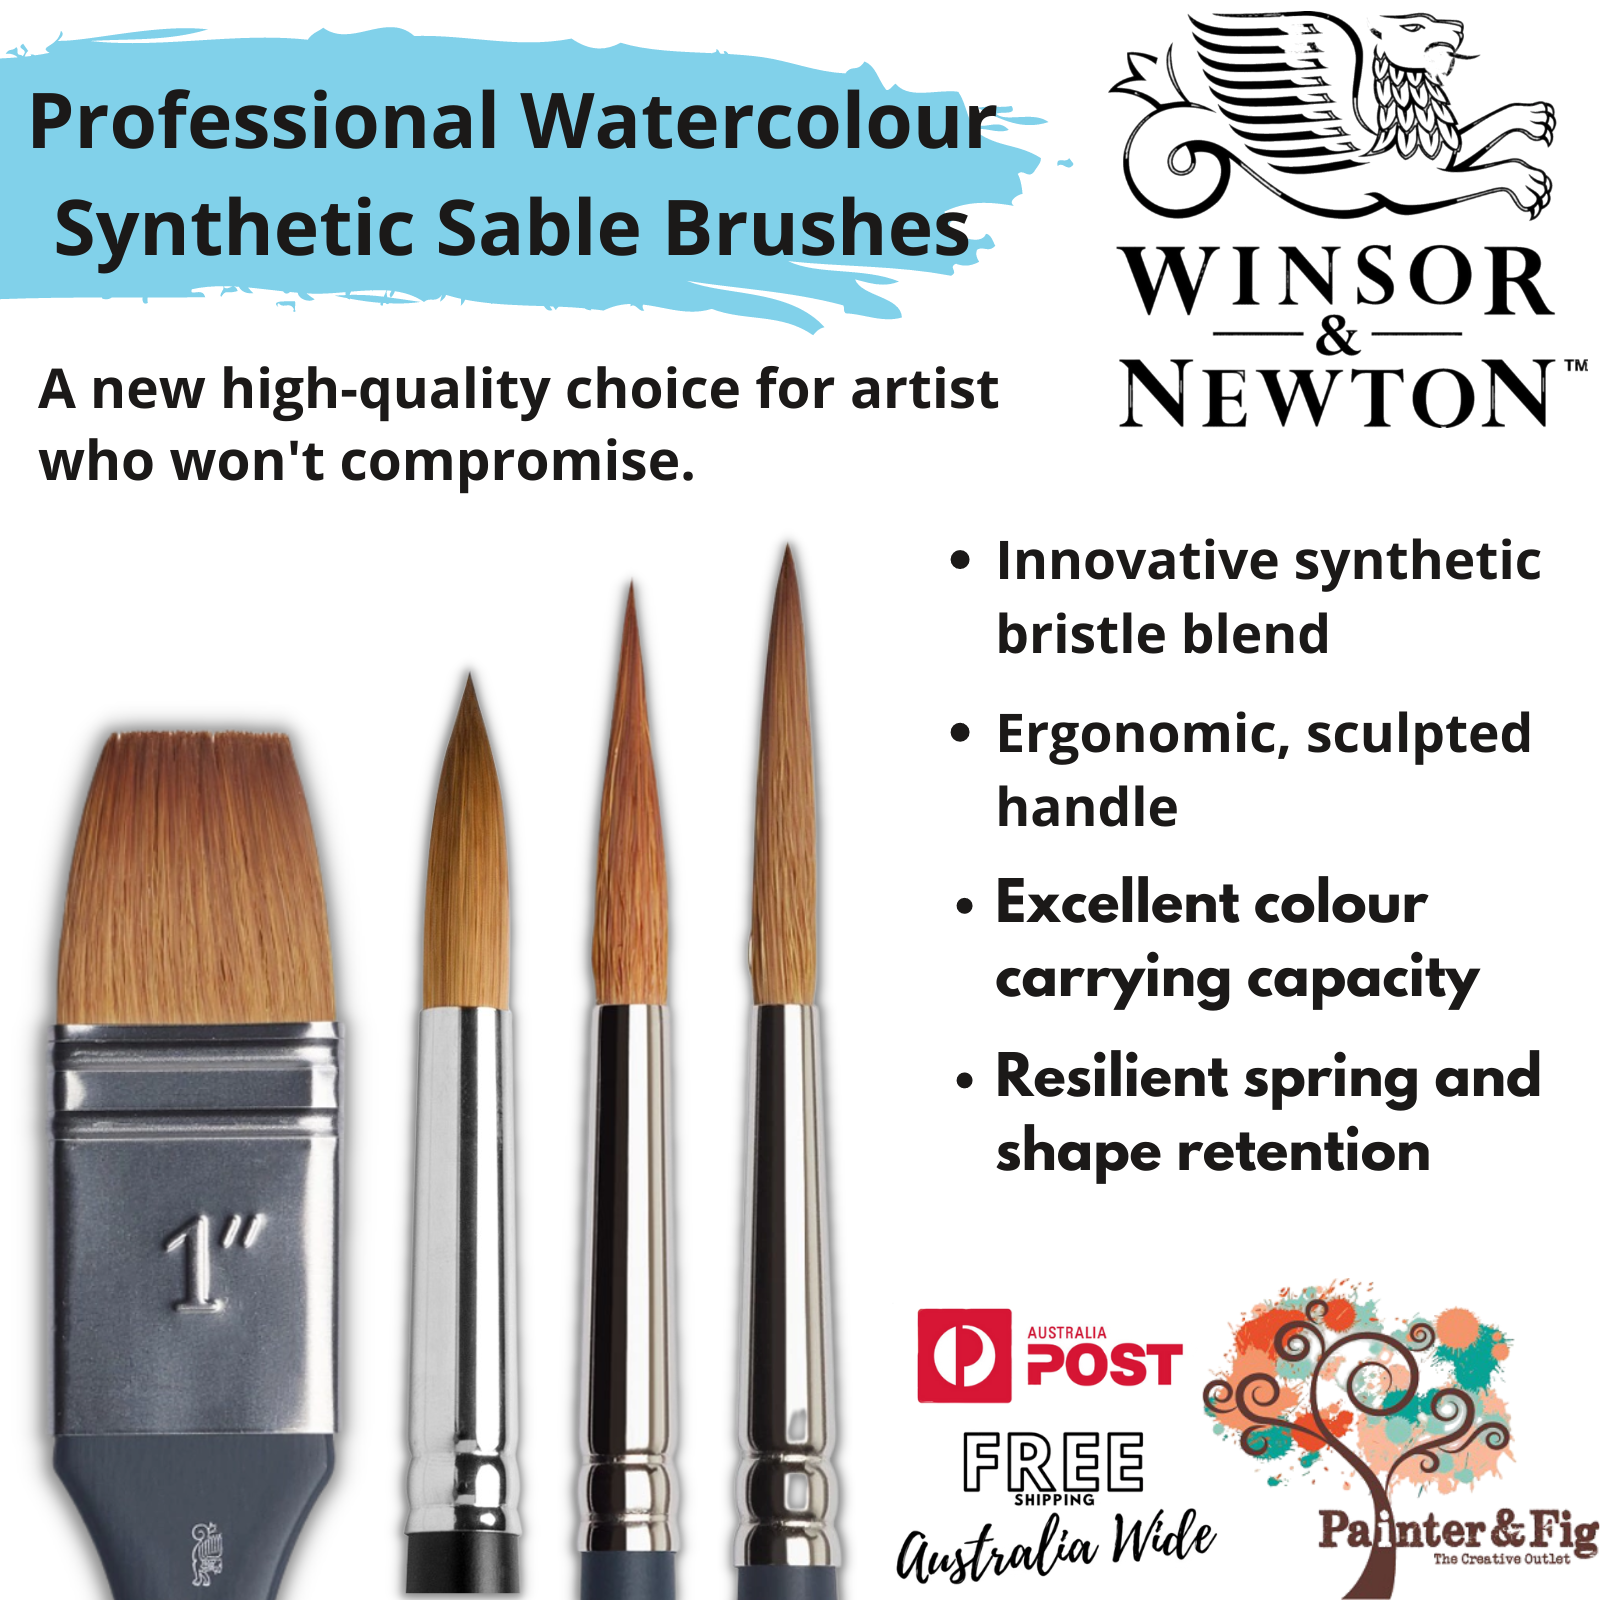 Winsor and Newton Professional Watercolour Paintbrushes, Synthetic Sable Brushes